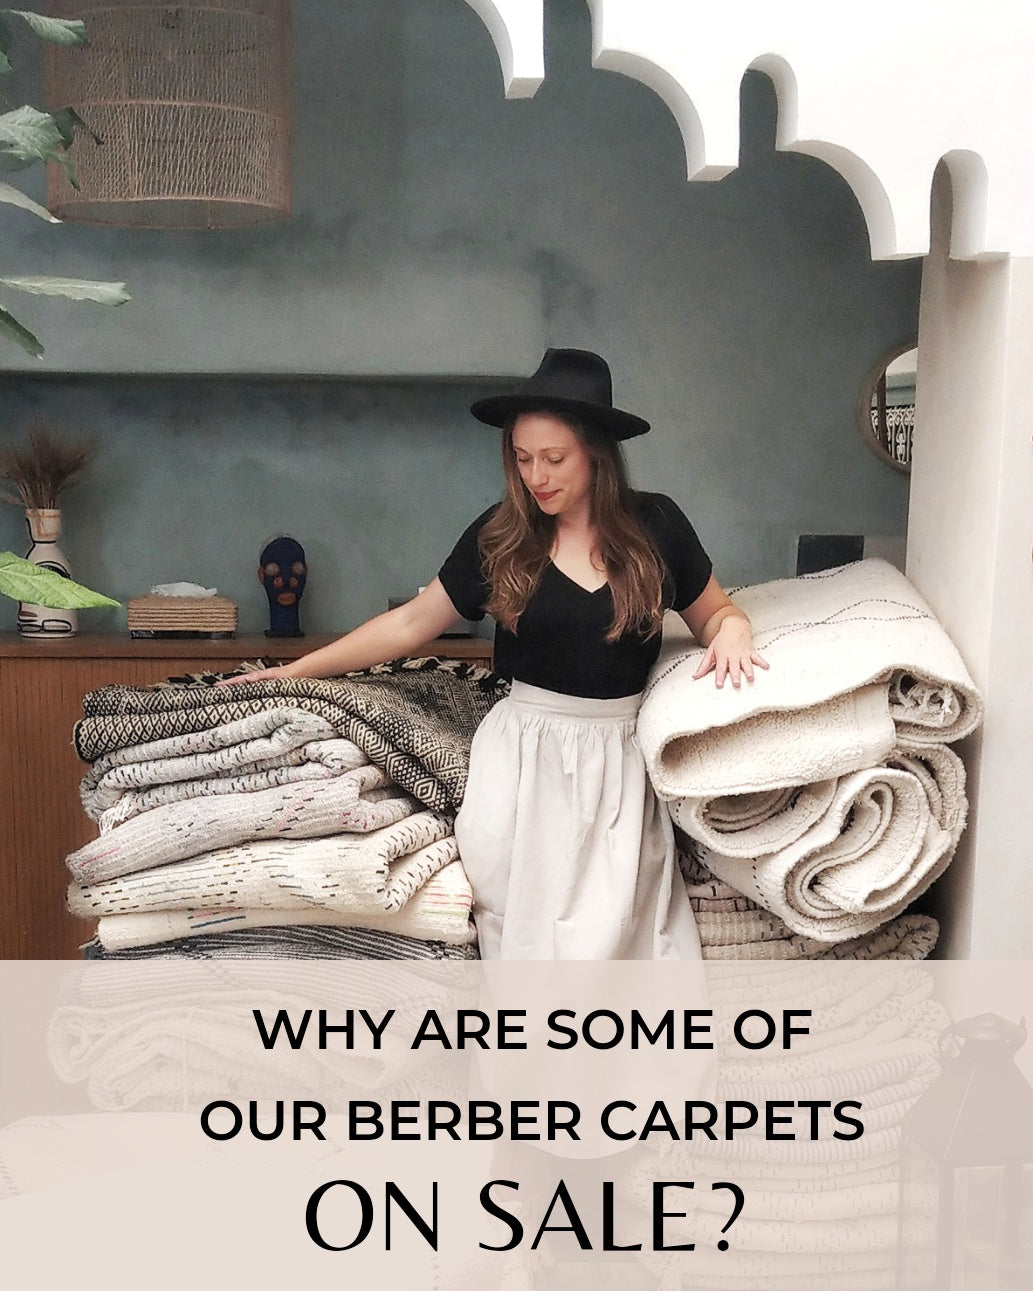 Why are some Berber carpets on sale?